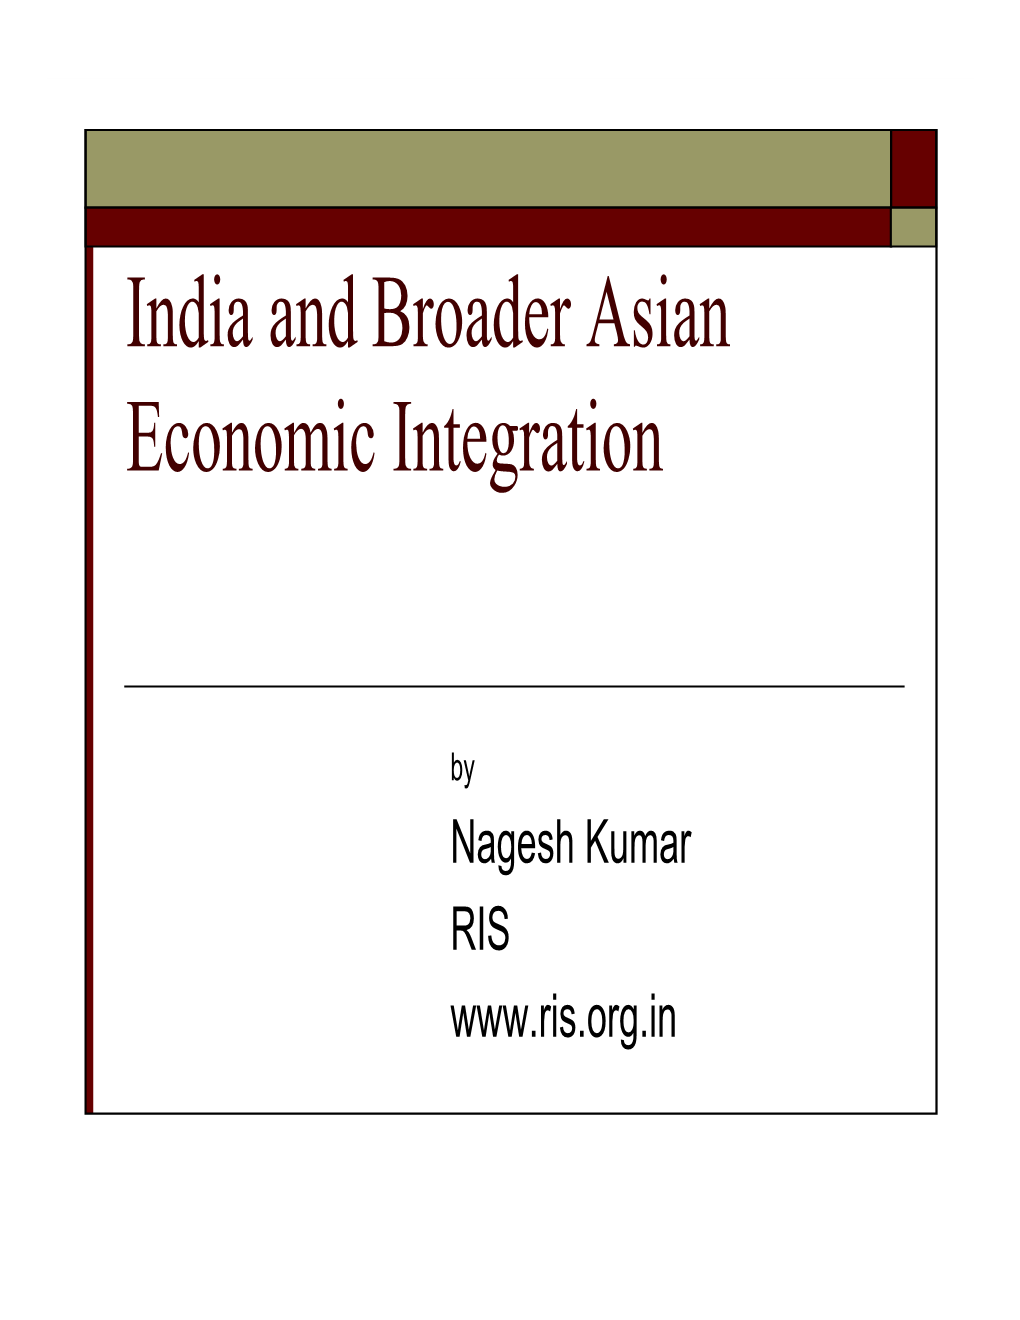 India and Broader Asian Economic Integration